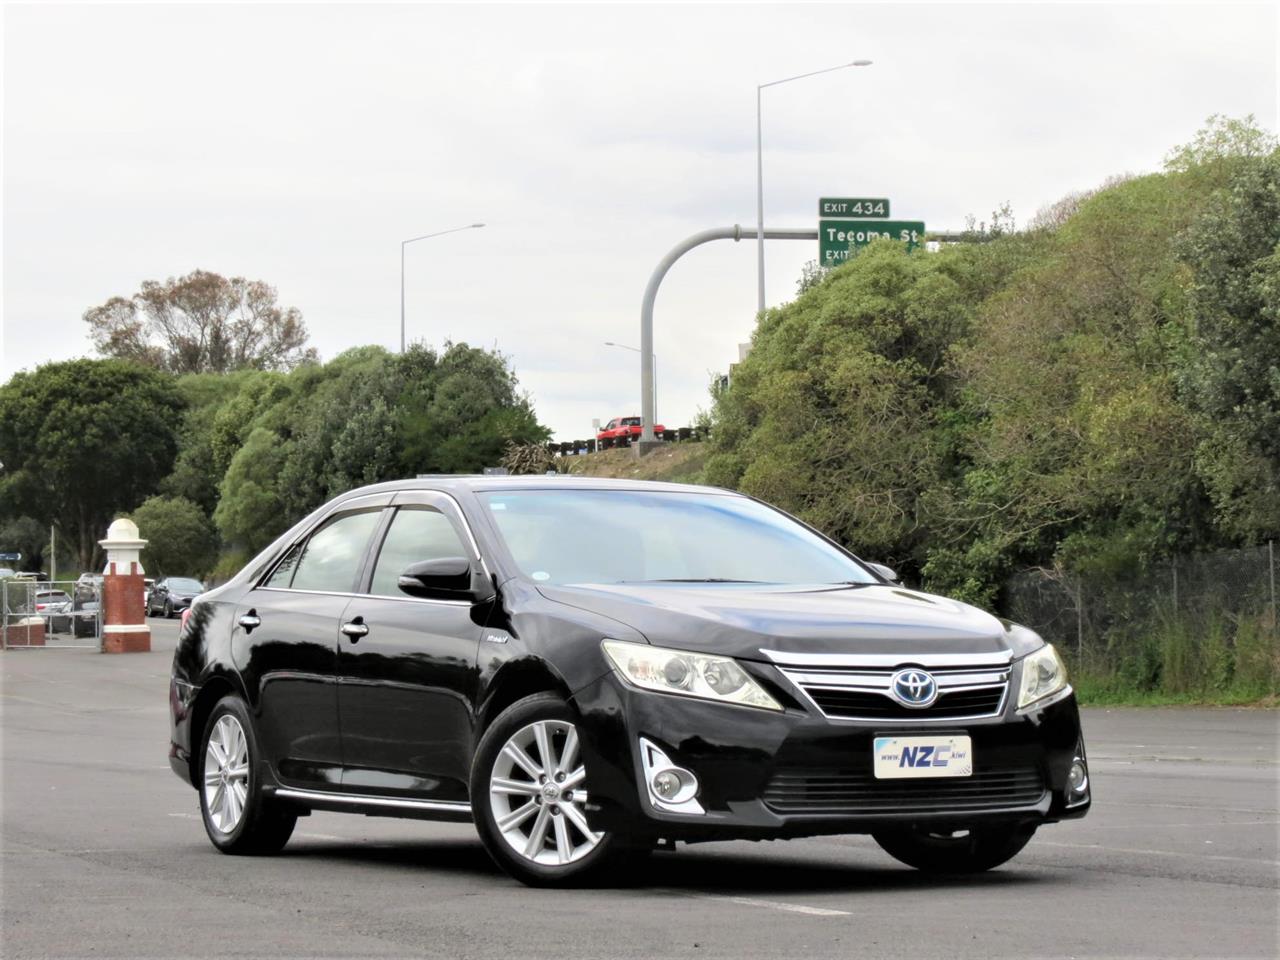 NZC best hot price for 2012 Toyota Camry in Auckland